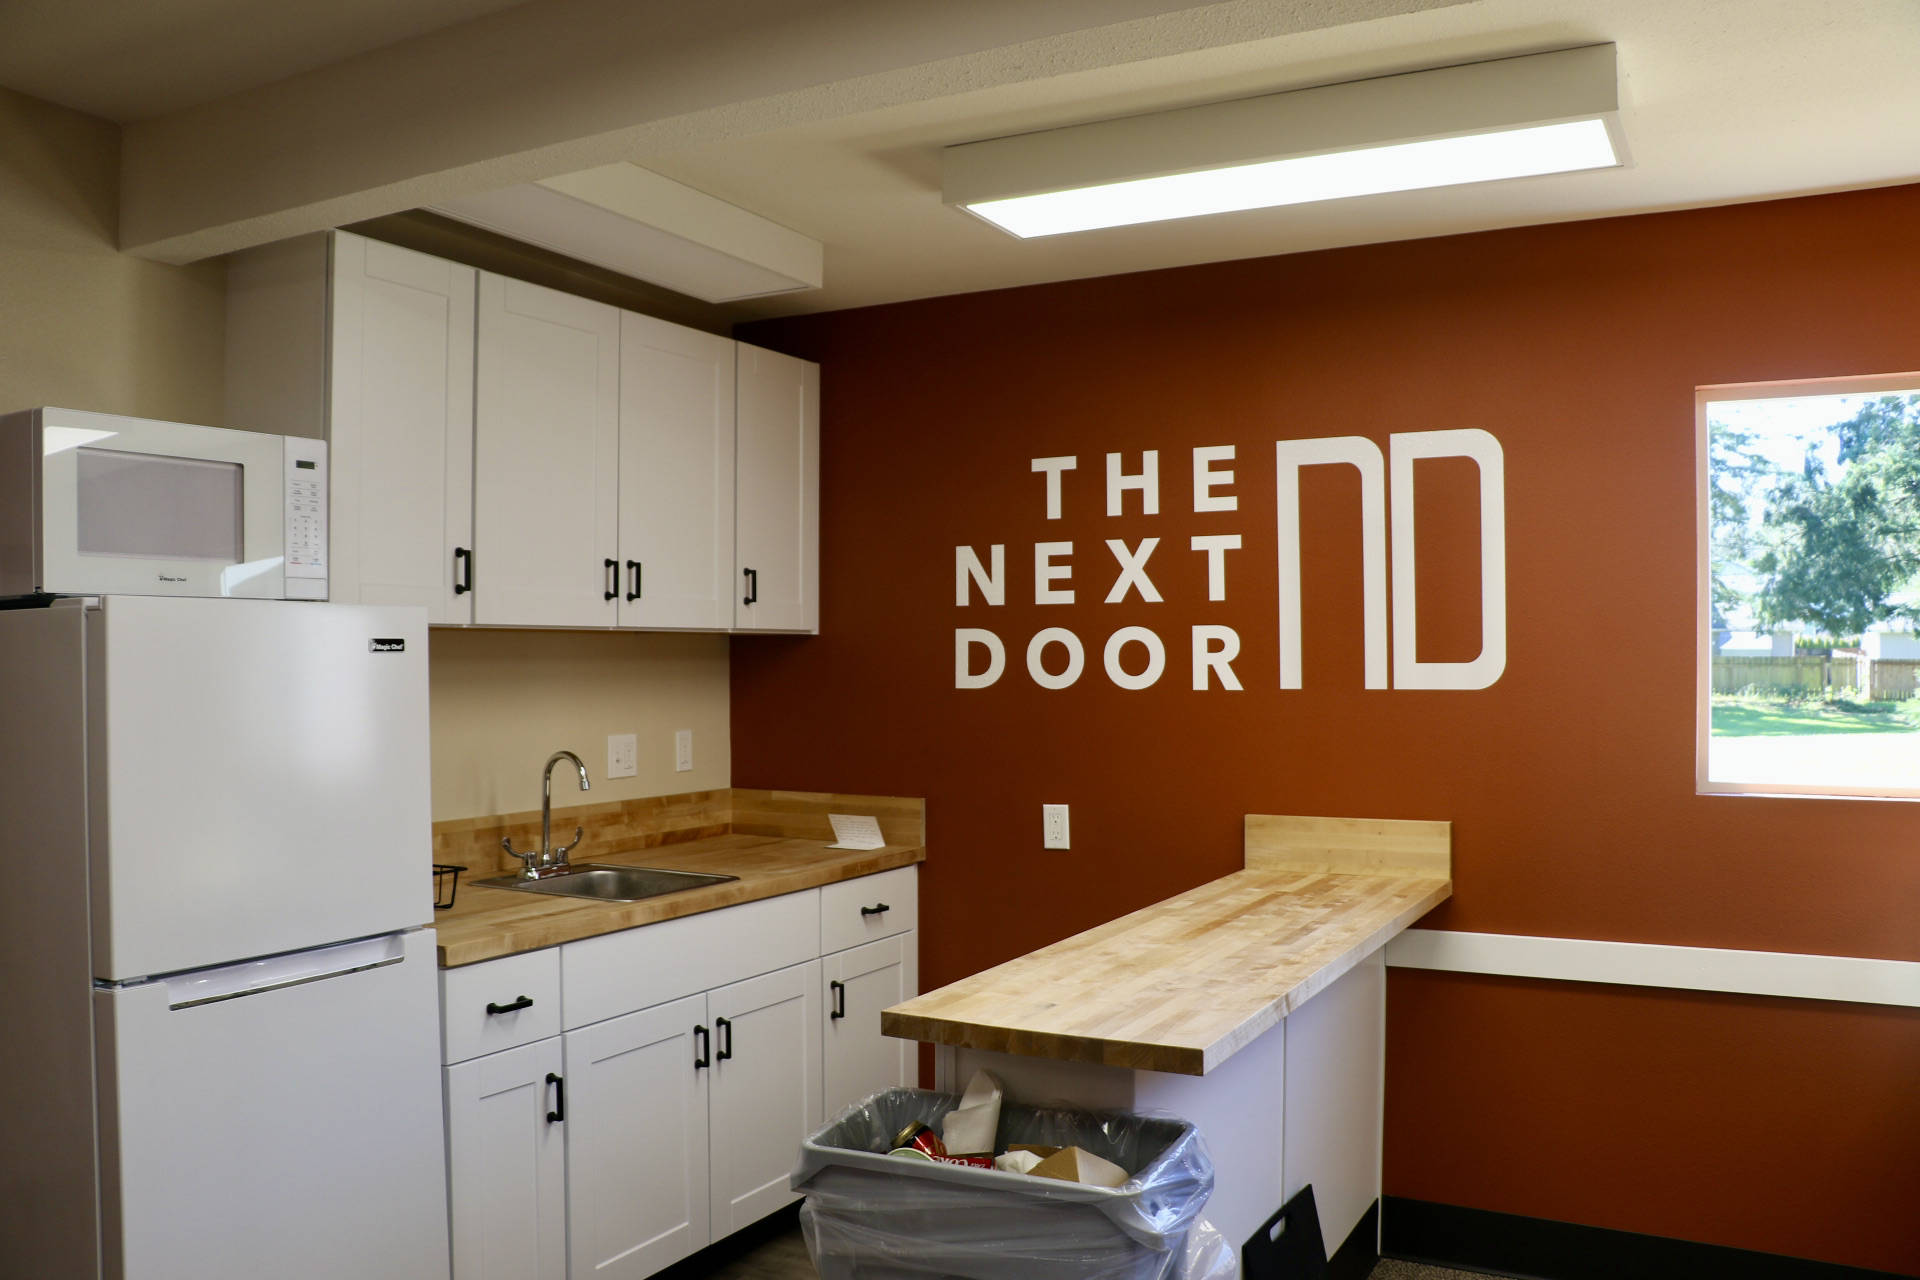 The Next Door’s new kitchen provides a space for studying with snacks and soda close at hand. (Ken Park/North Kitsap Herald photos)